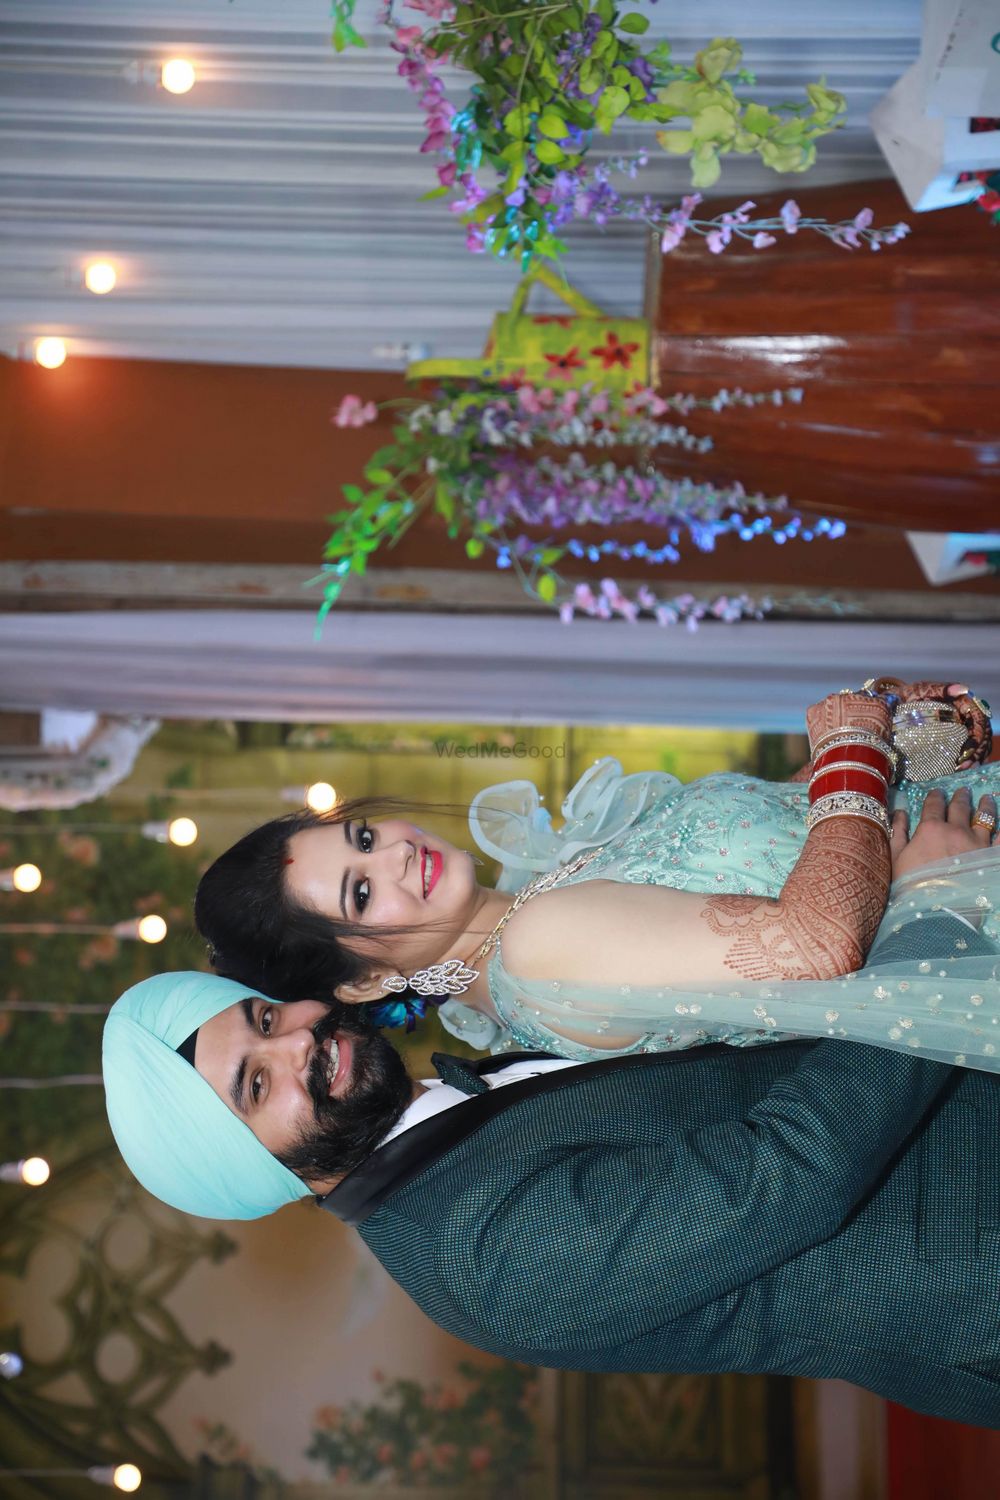 Photo From Anibir's wedding looks - By Sneha SK Makeovers